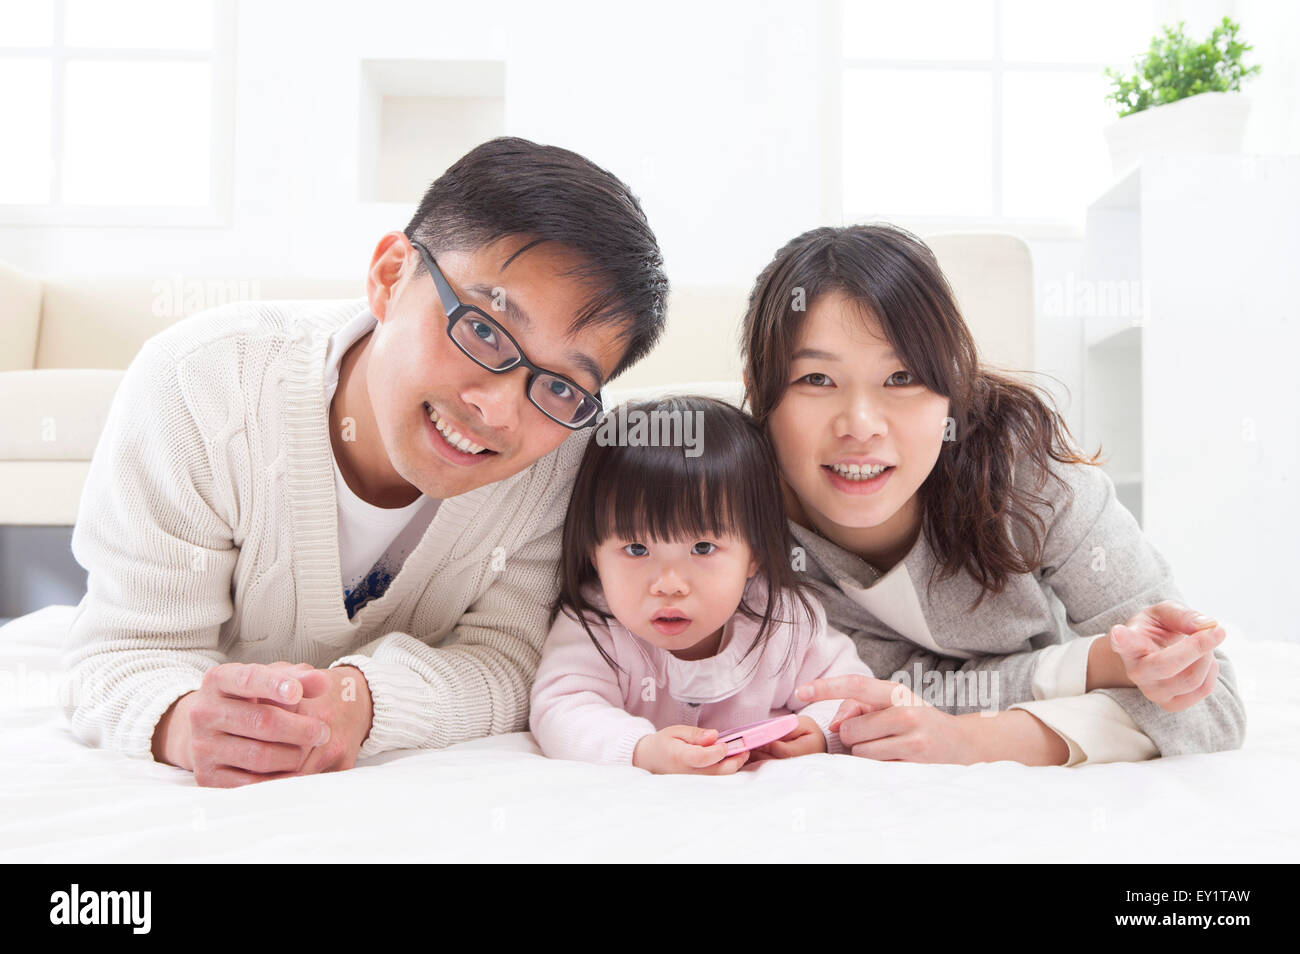 Family with one child lying down on front and smiling at the camera together, Stock Photo